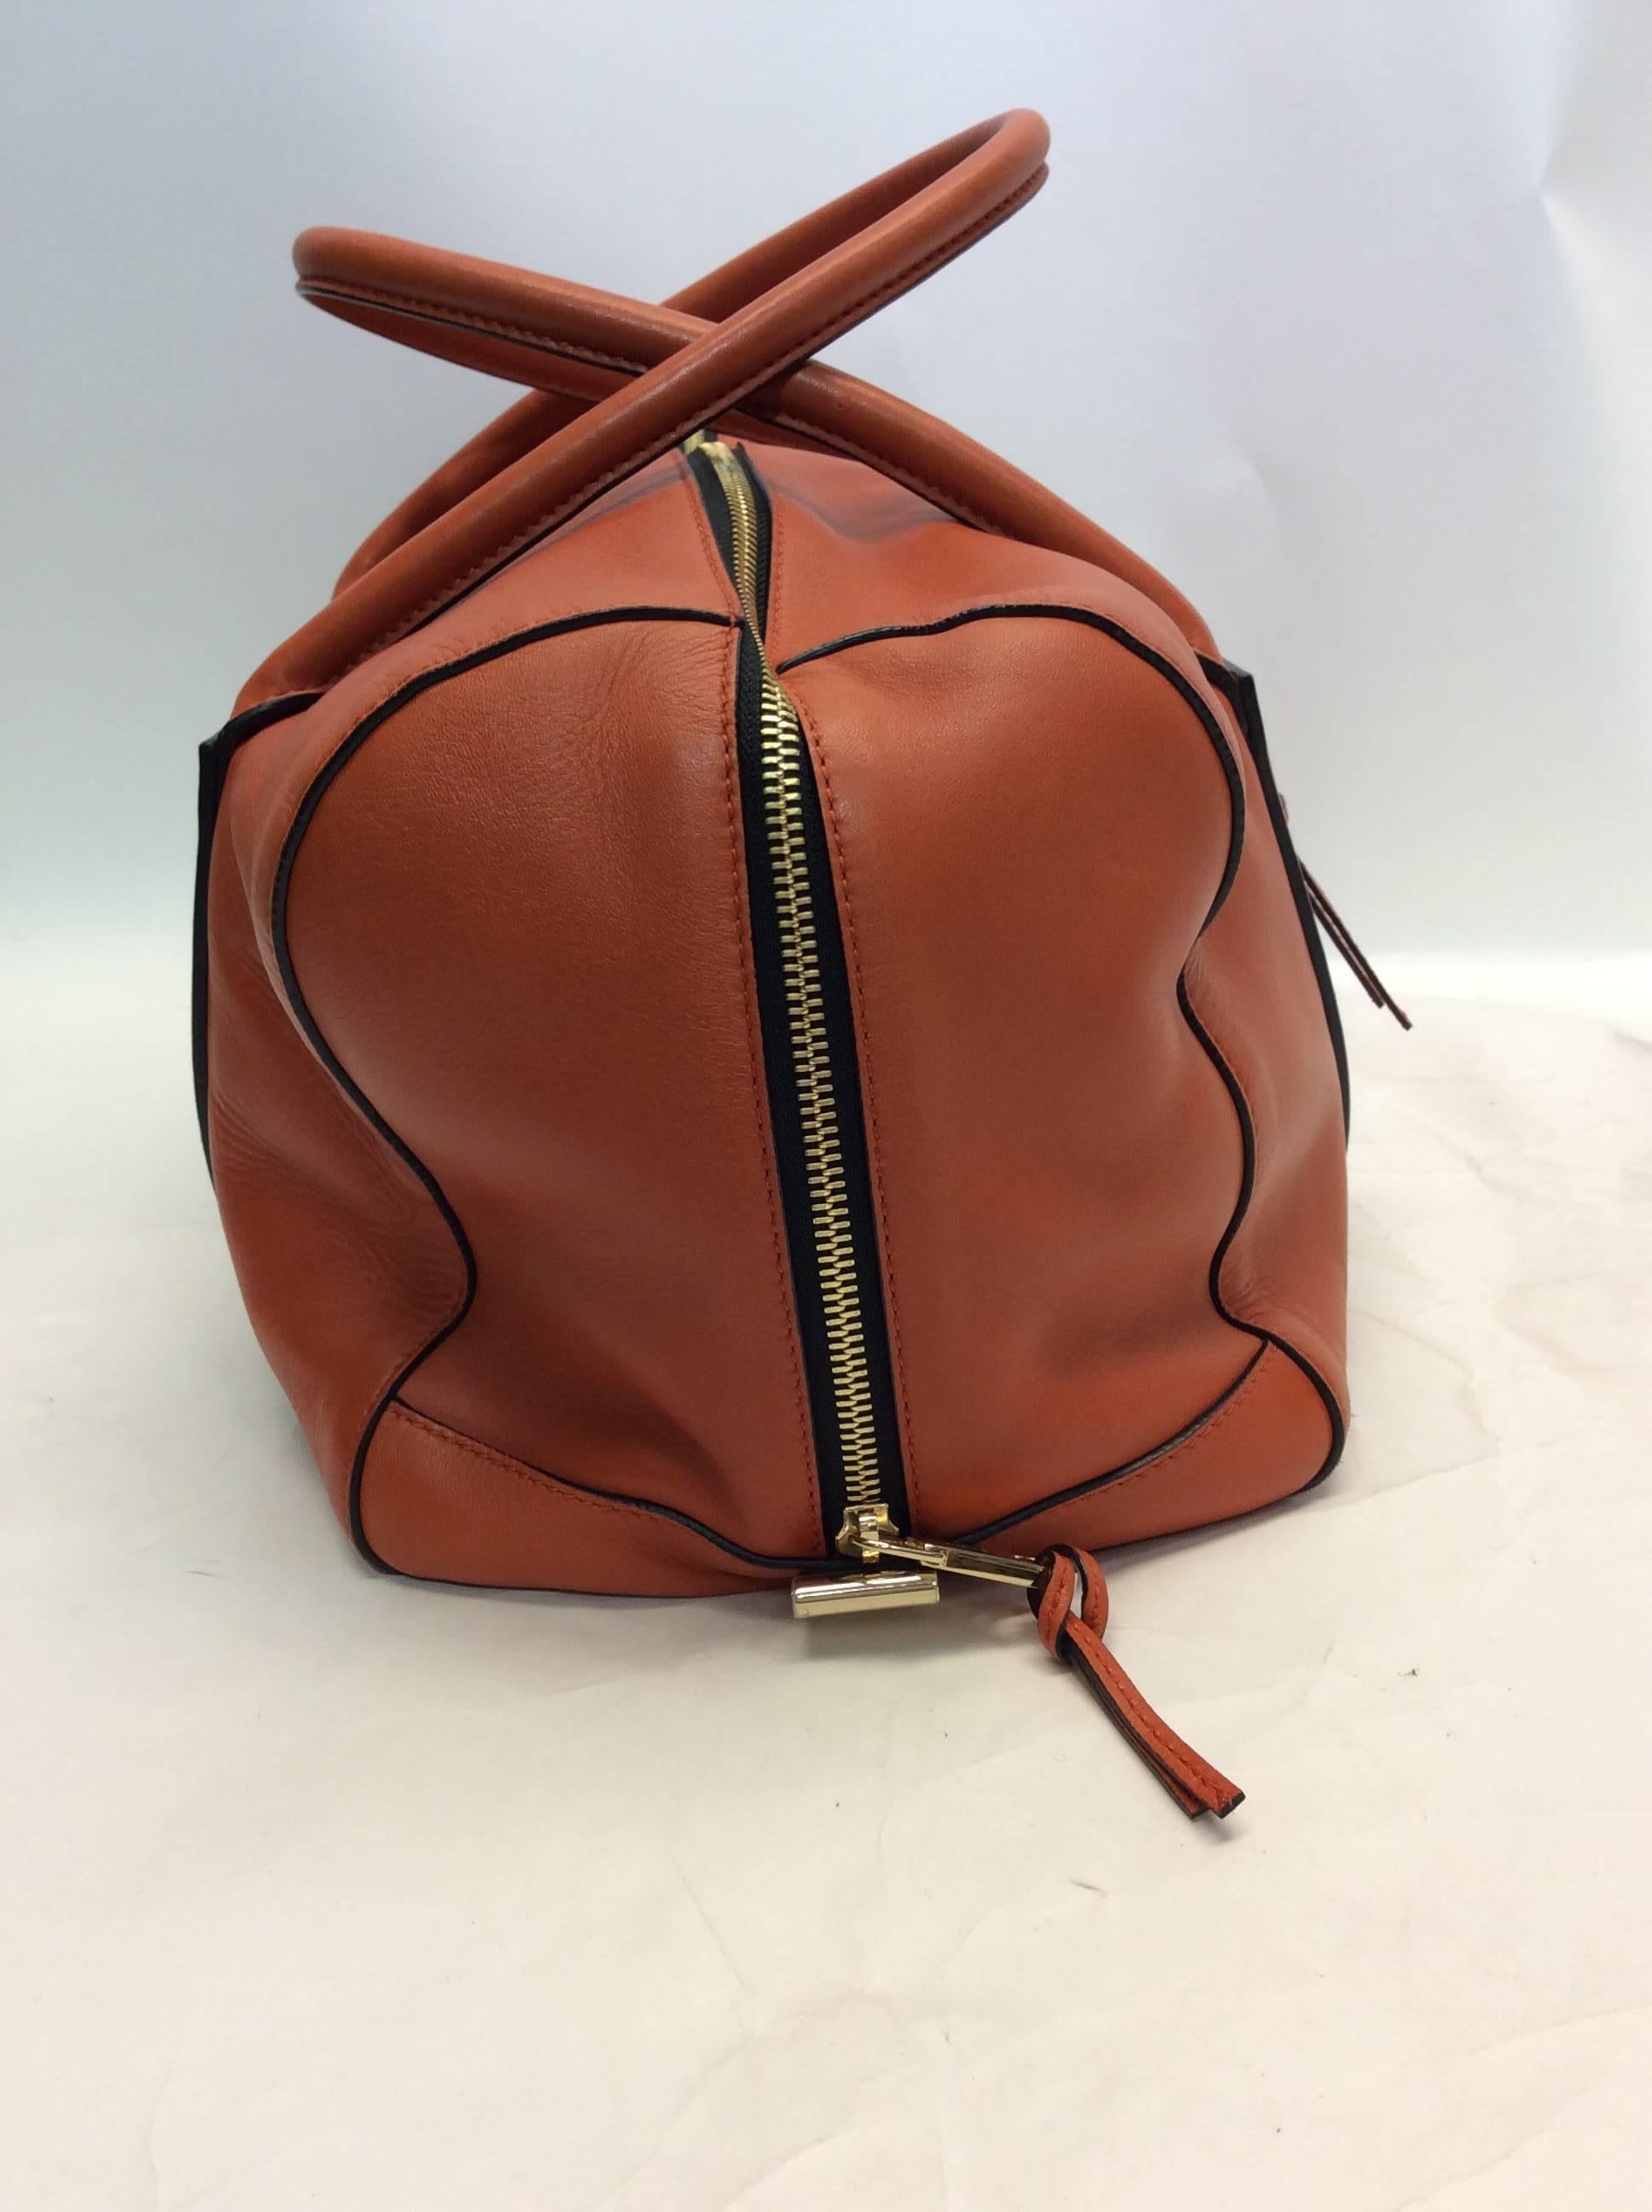 Chloe Orange Leather Speedy In Excellent Condition For Sale In Narberth, PA